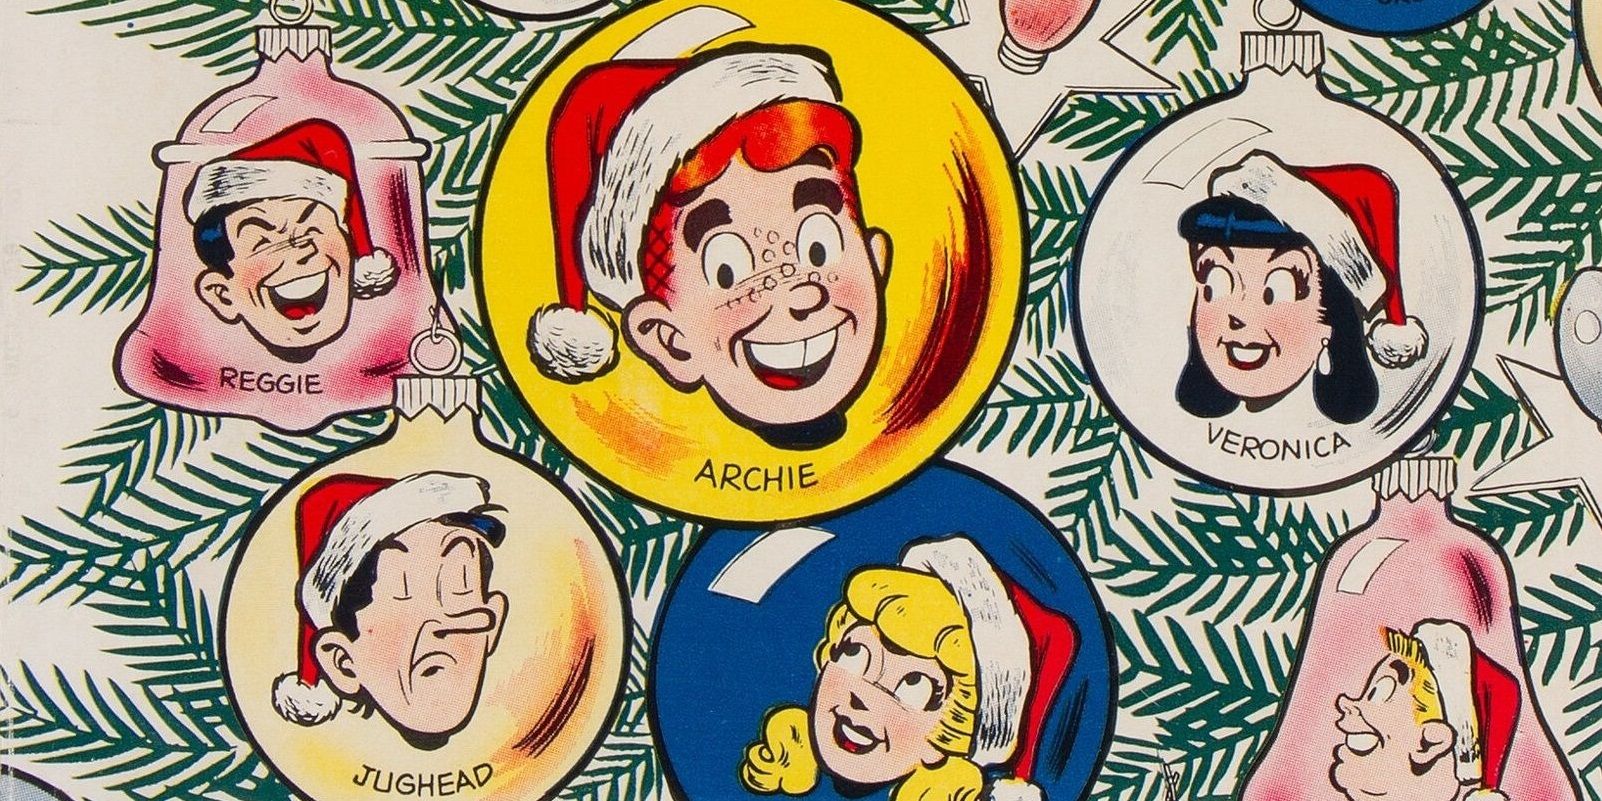 Archie and the gang as Christmas ornaments